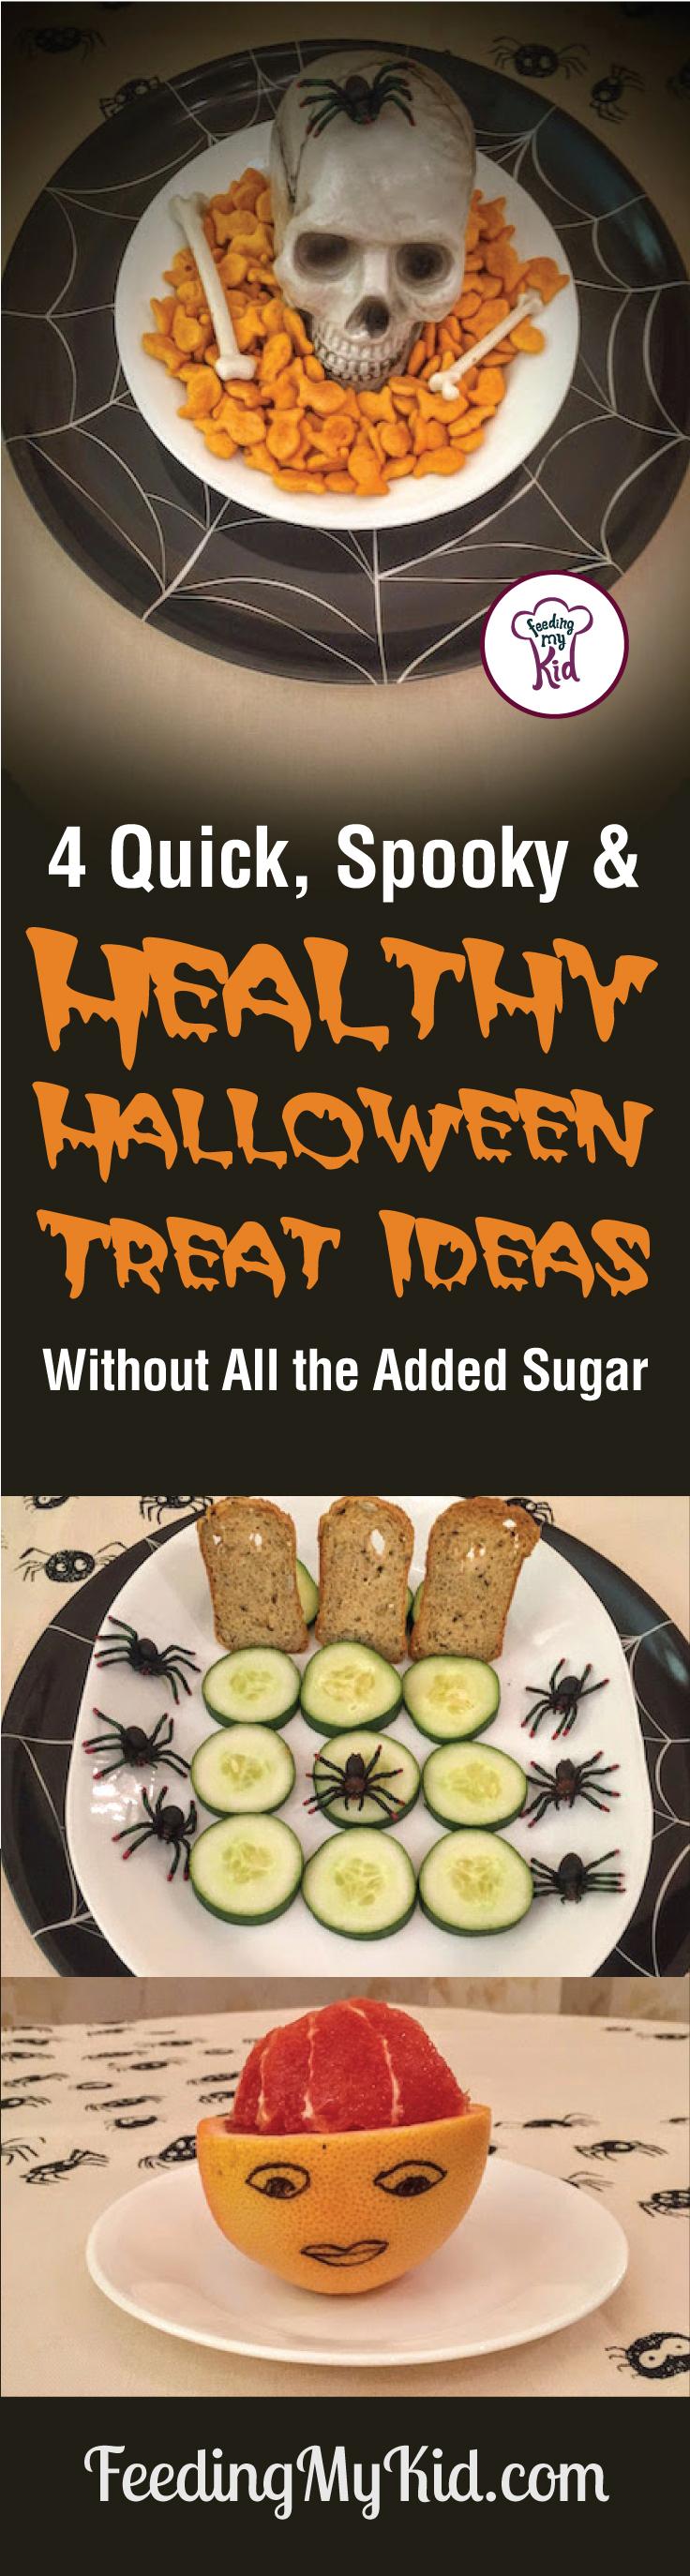 Skip the sweets this Halloween and try these healthy Halloween snacks! These spooky snacks are delicious have zero added sugar.